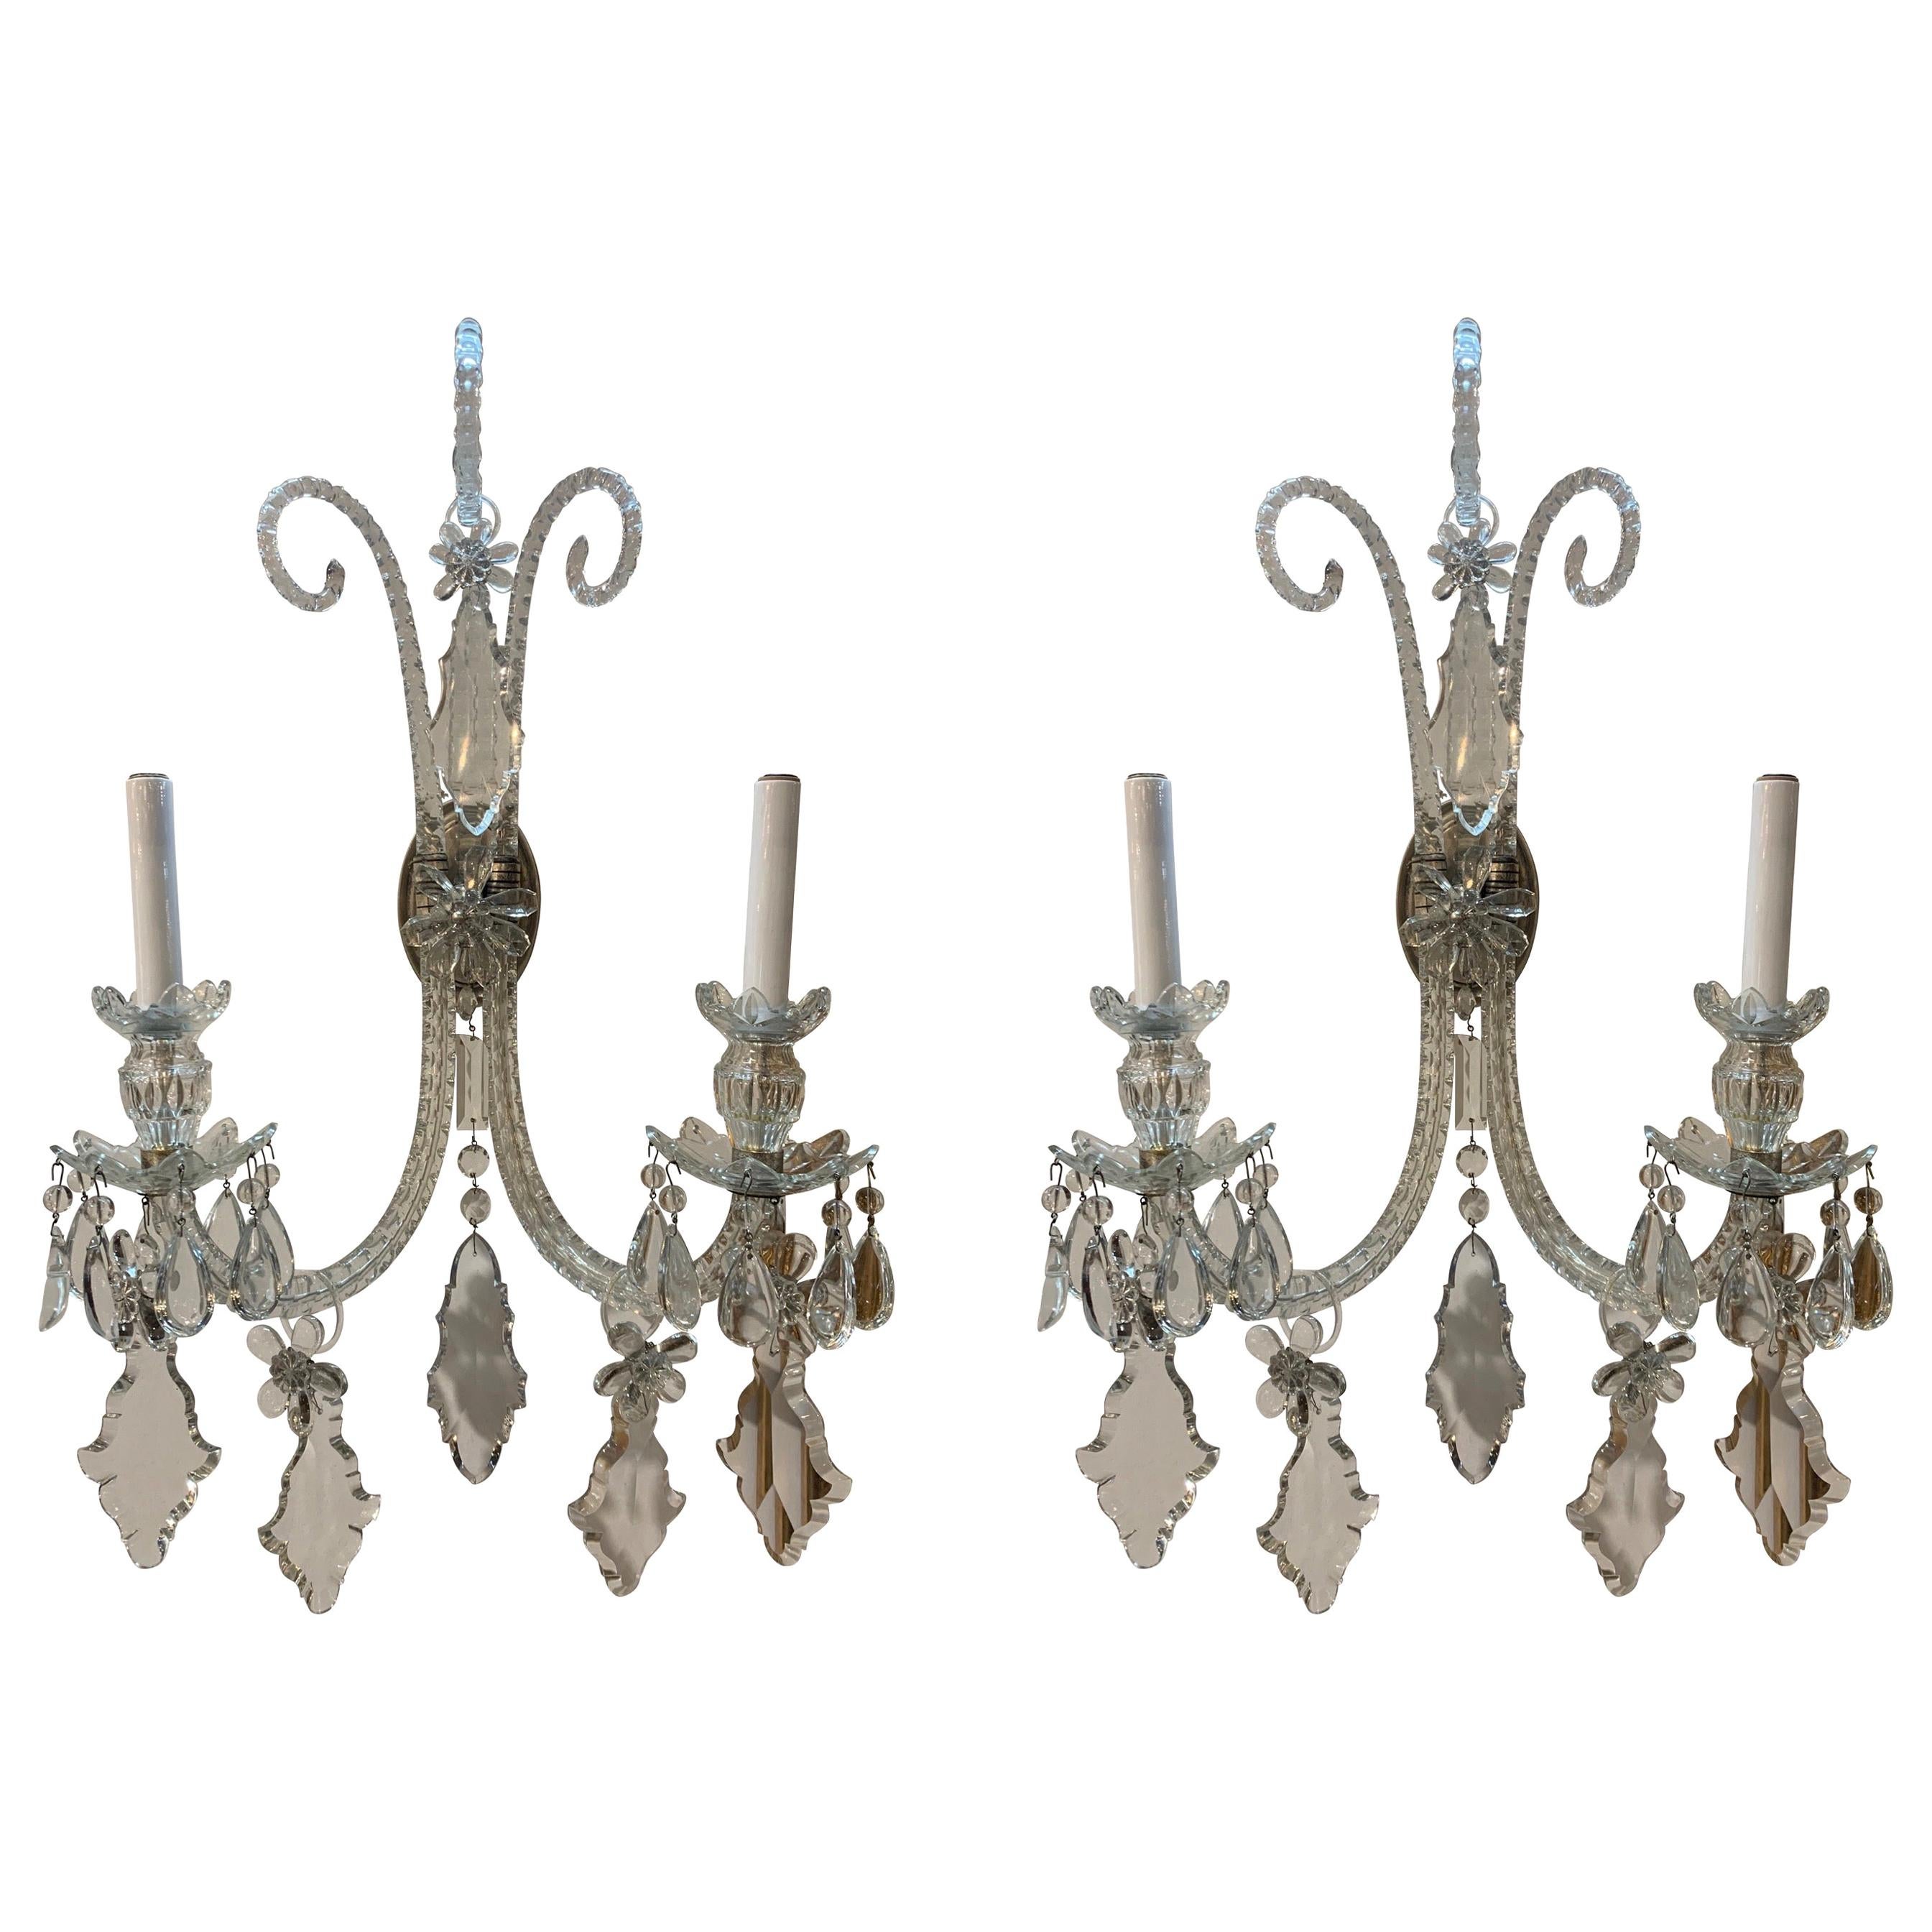 Pair of Antique English Waterford Style Crystal Wall Sconces